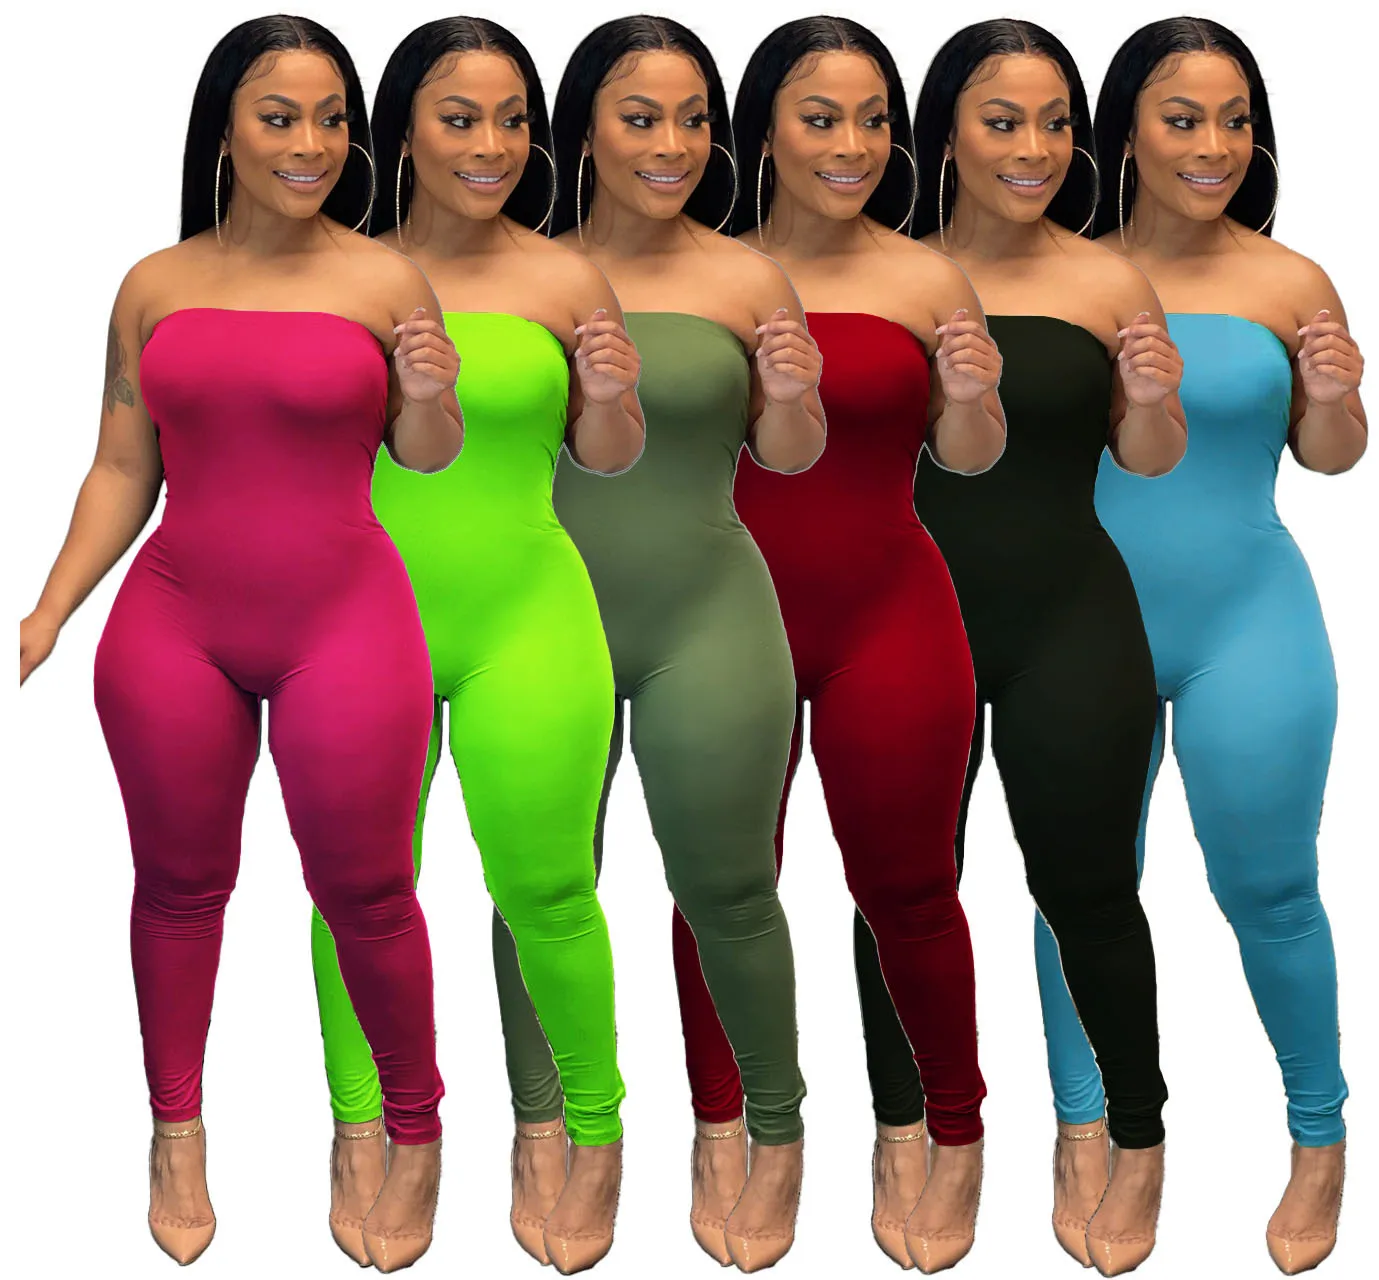 

2021 new arrivals summer strapless solid color slim jumpsuit summer sexy bodysuits for women, Burgundy/black/neo green/army green/rose red/sky blue